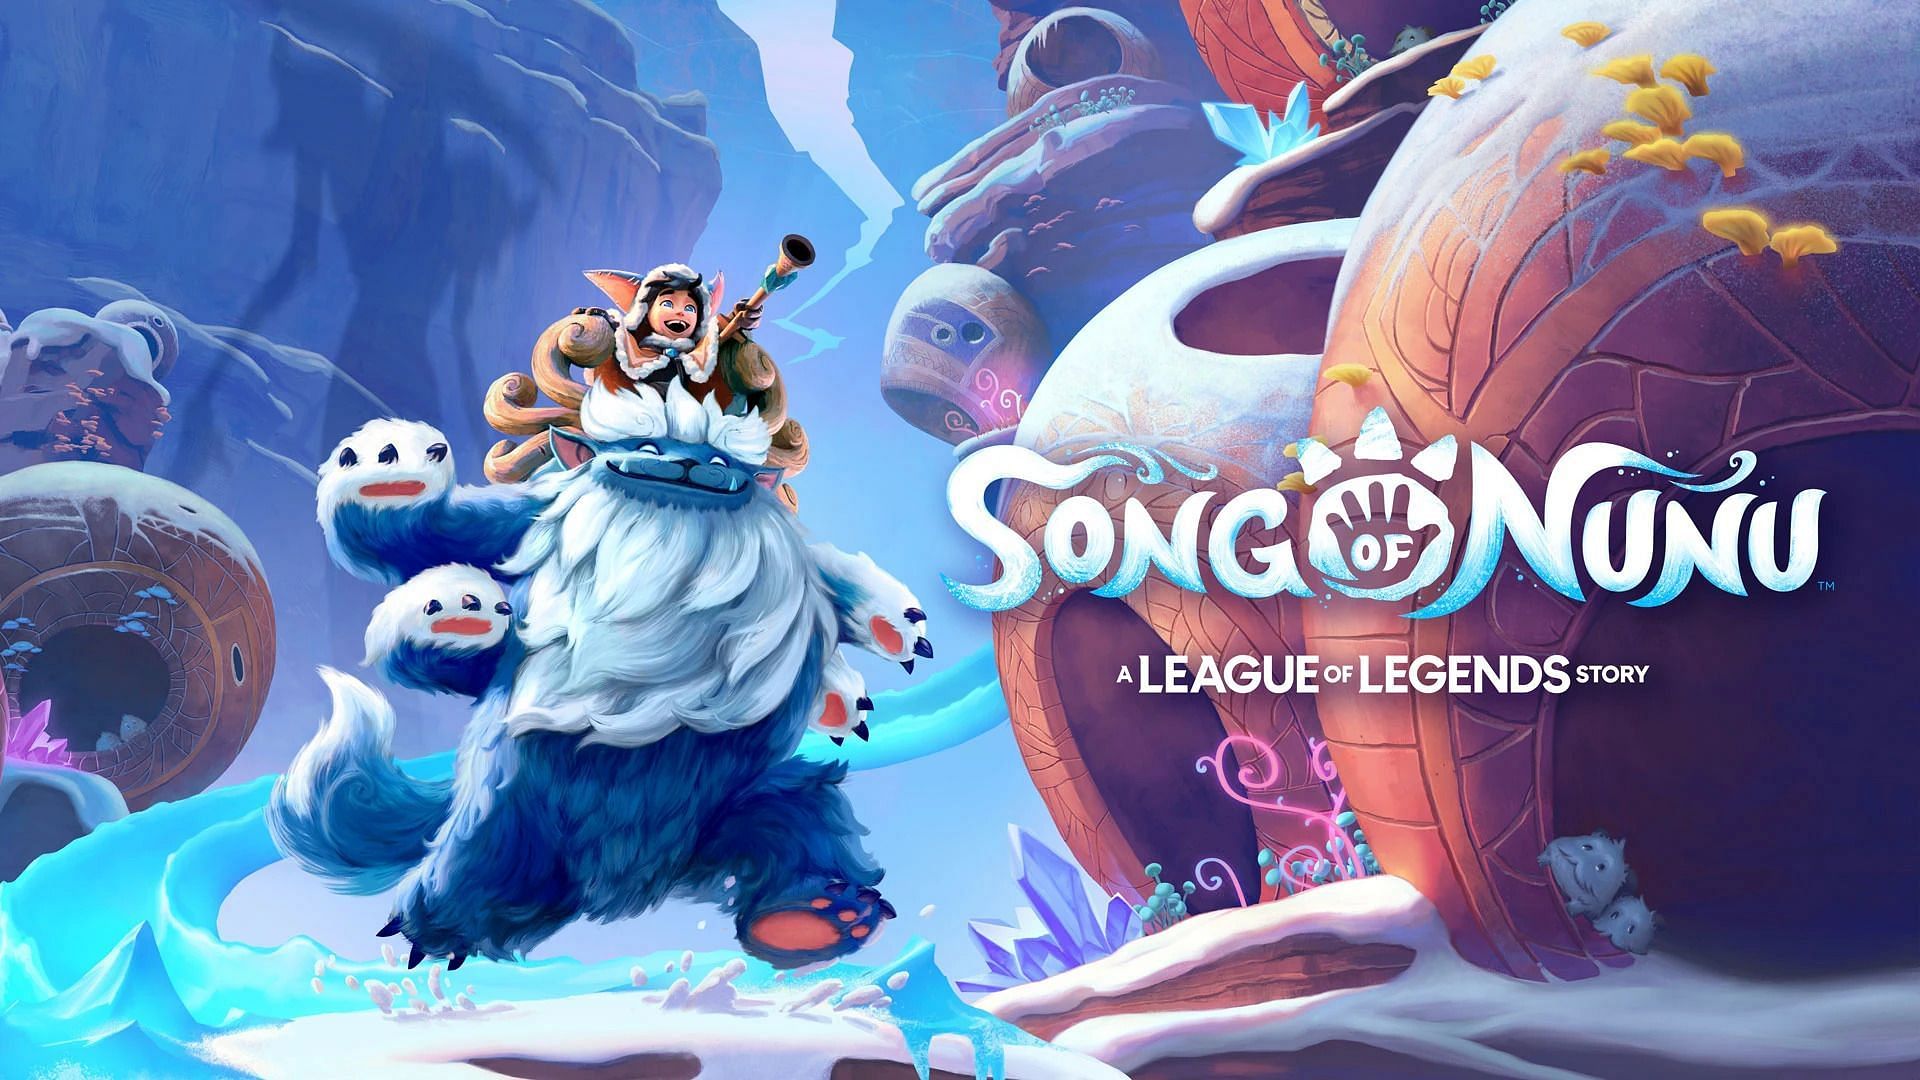 Song of Nunu is the latest single-player adventure title by Tequila Works (Image via Tequila Works)